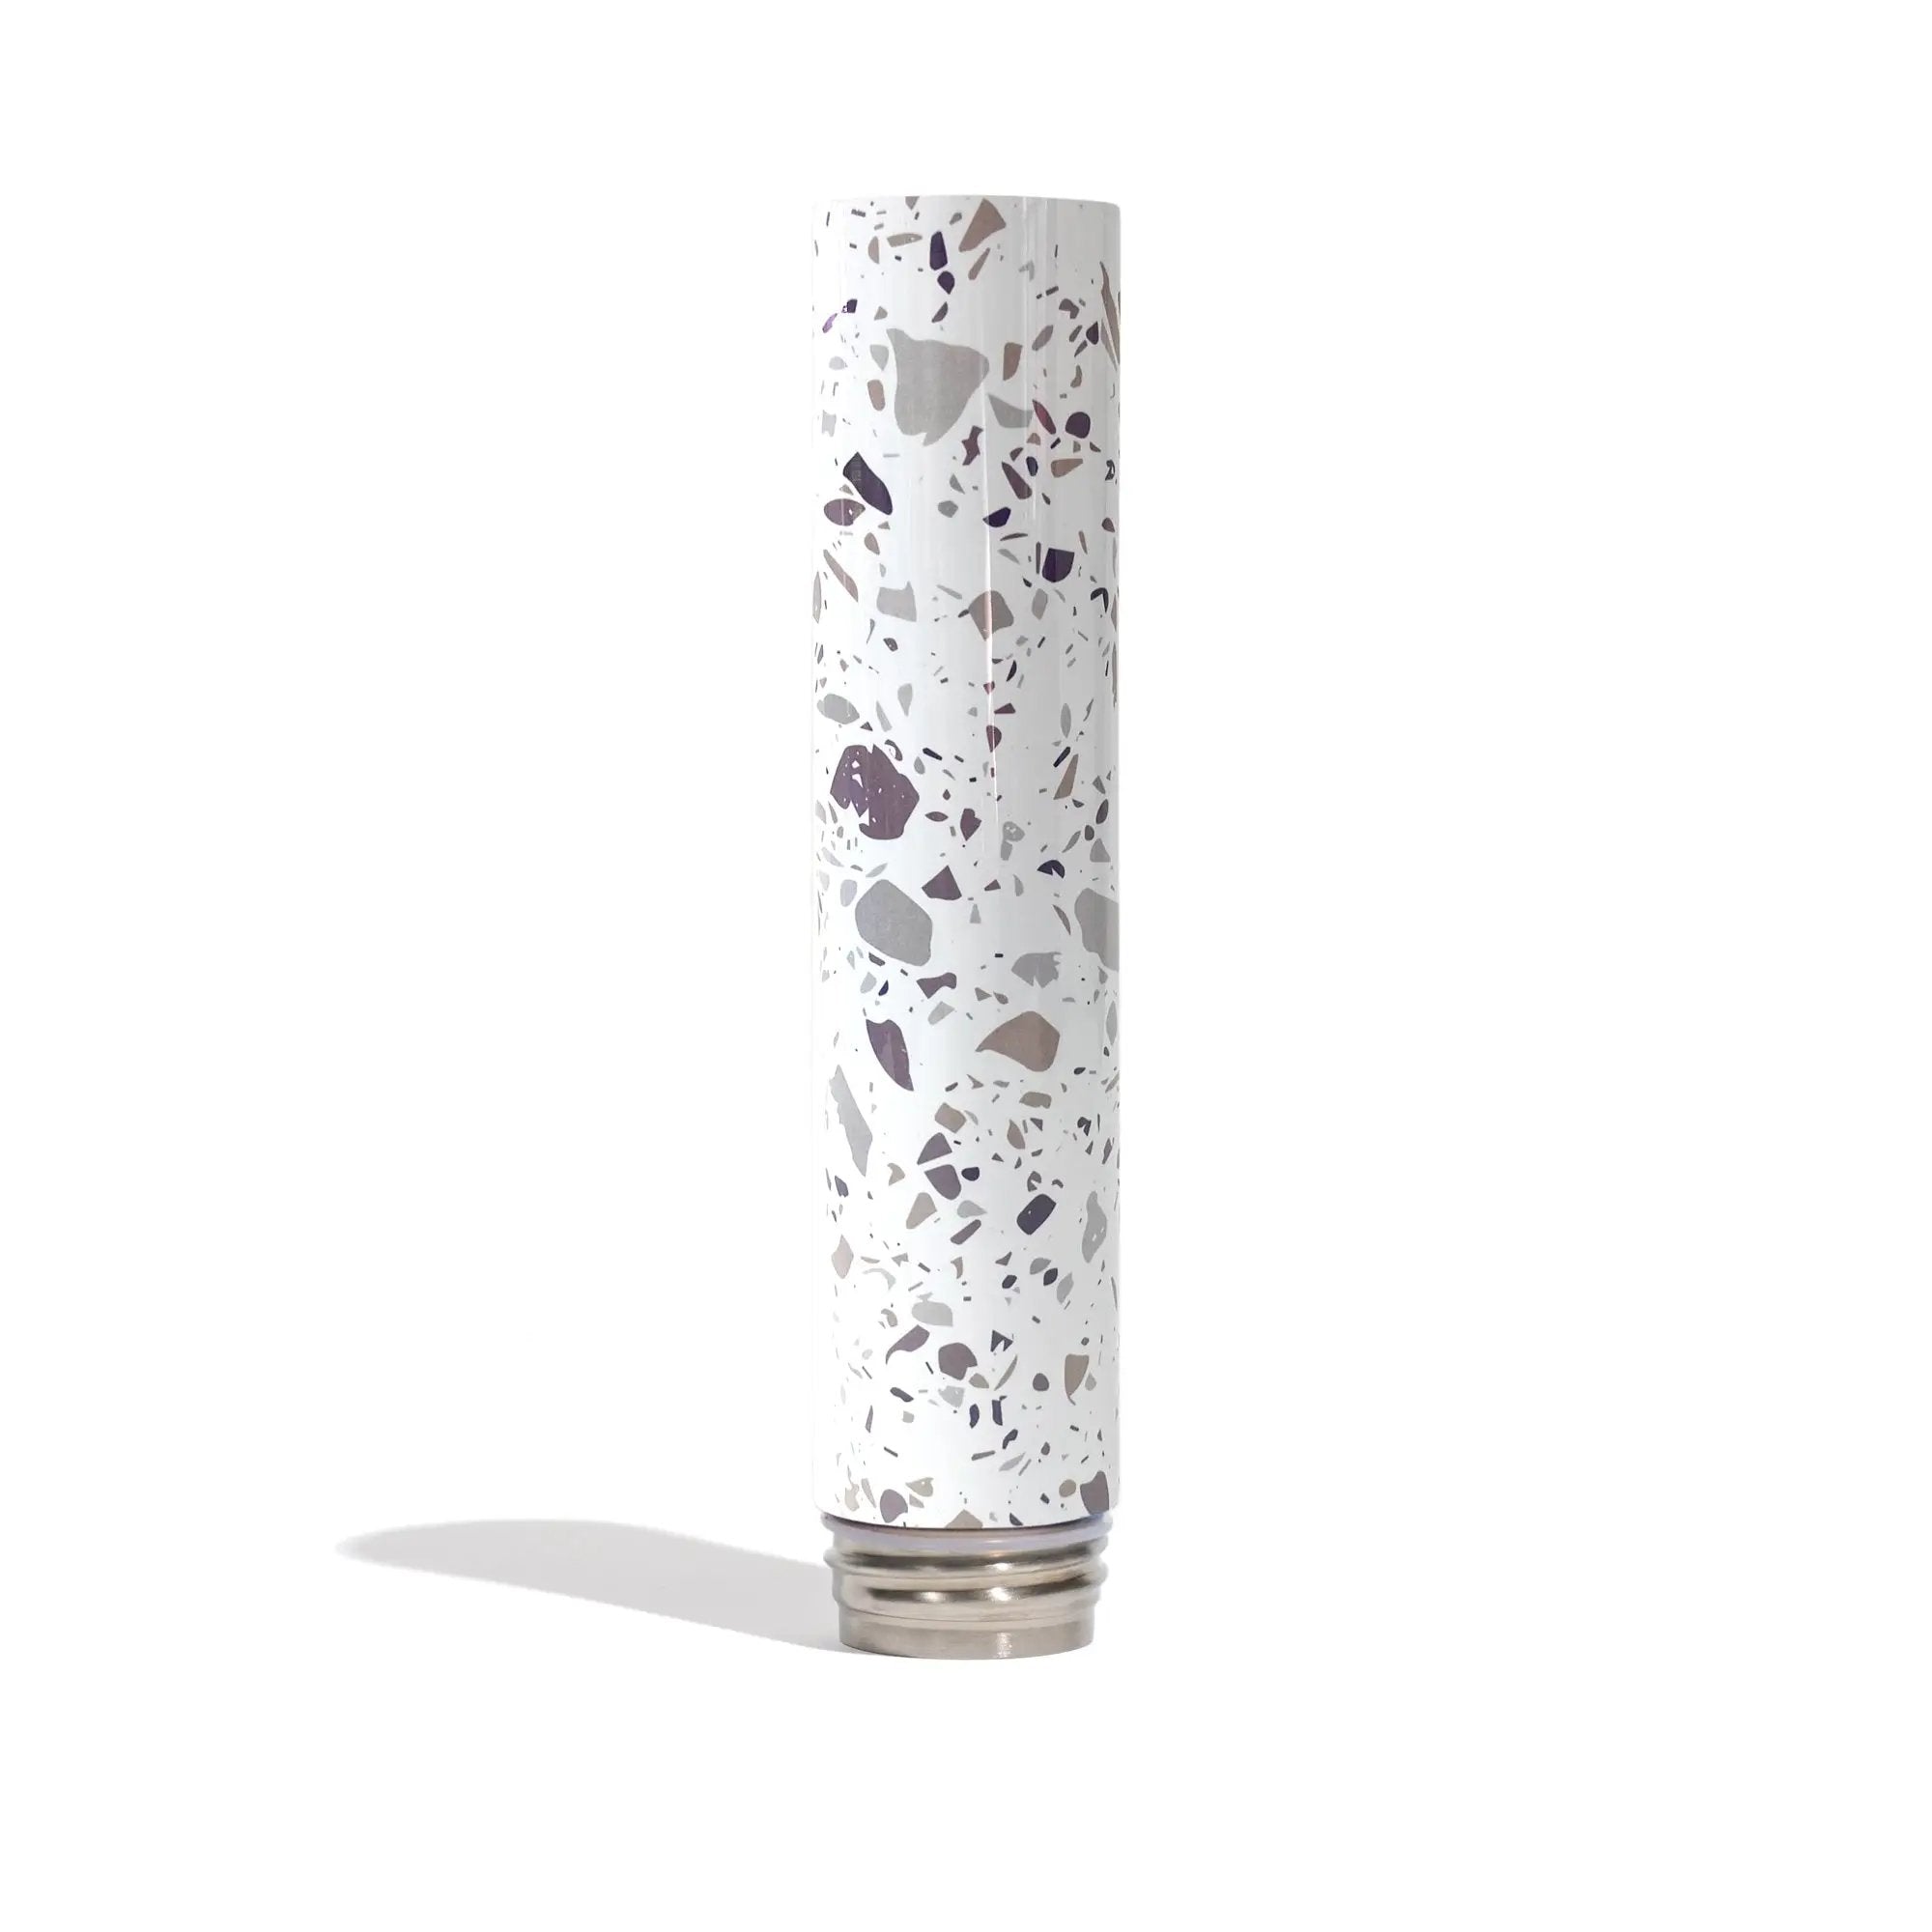 Chill - Mix & Match Series - White Terrazzo Neckpiece by Chill Steel Pipes